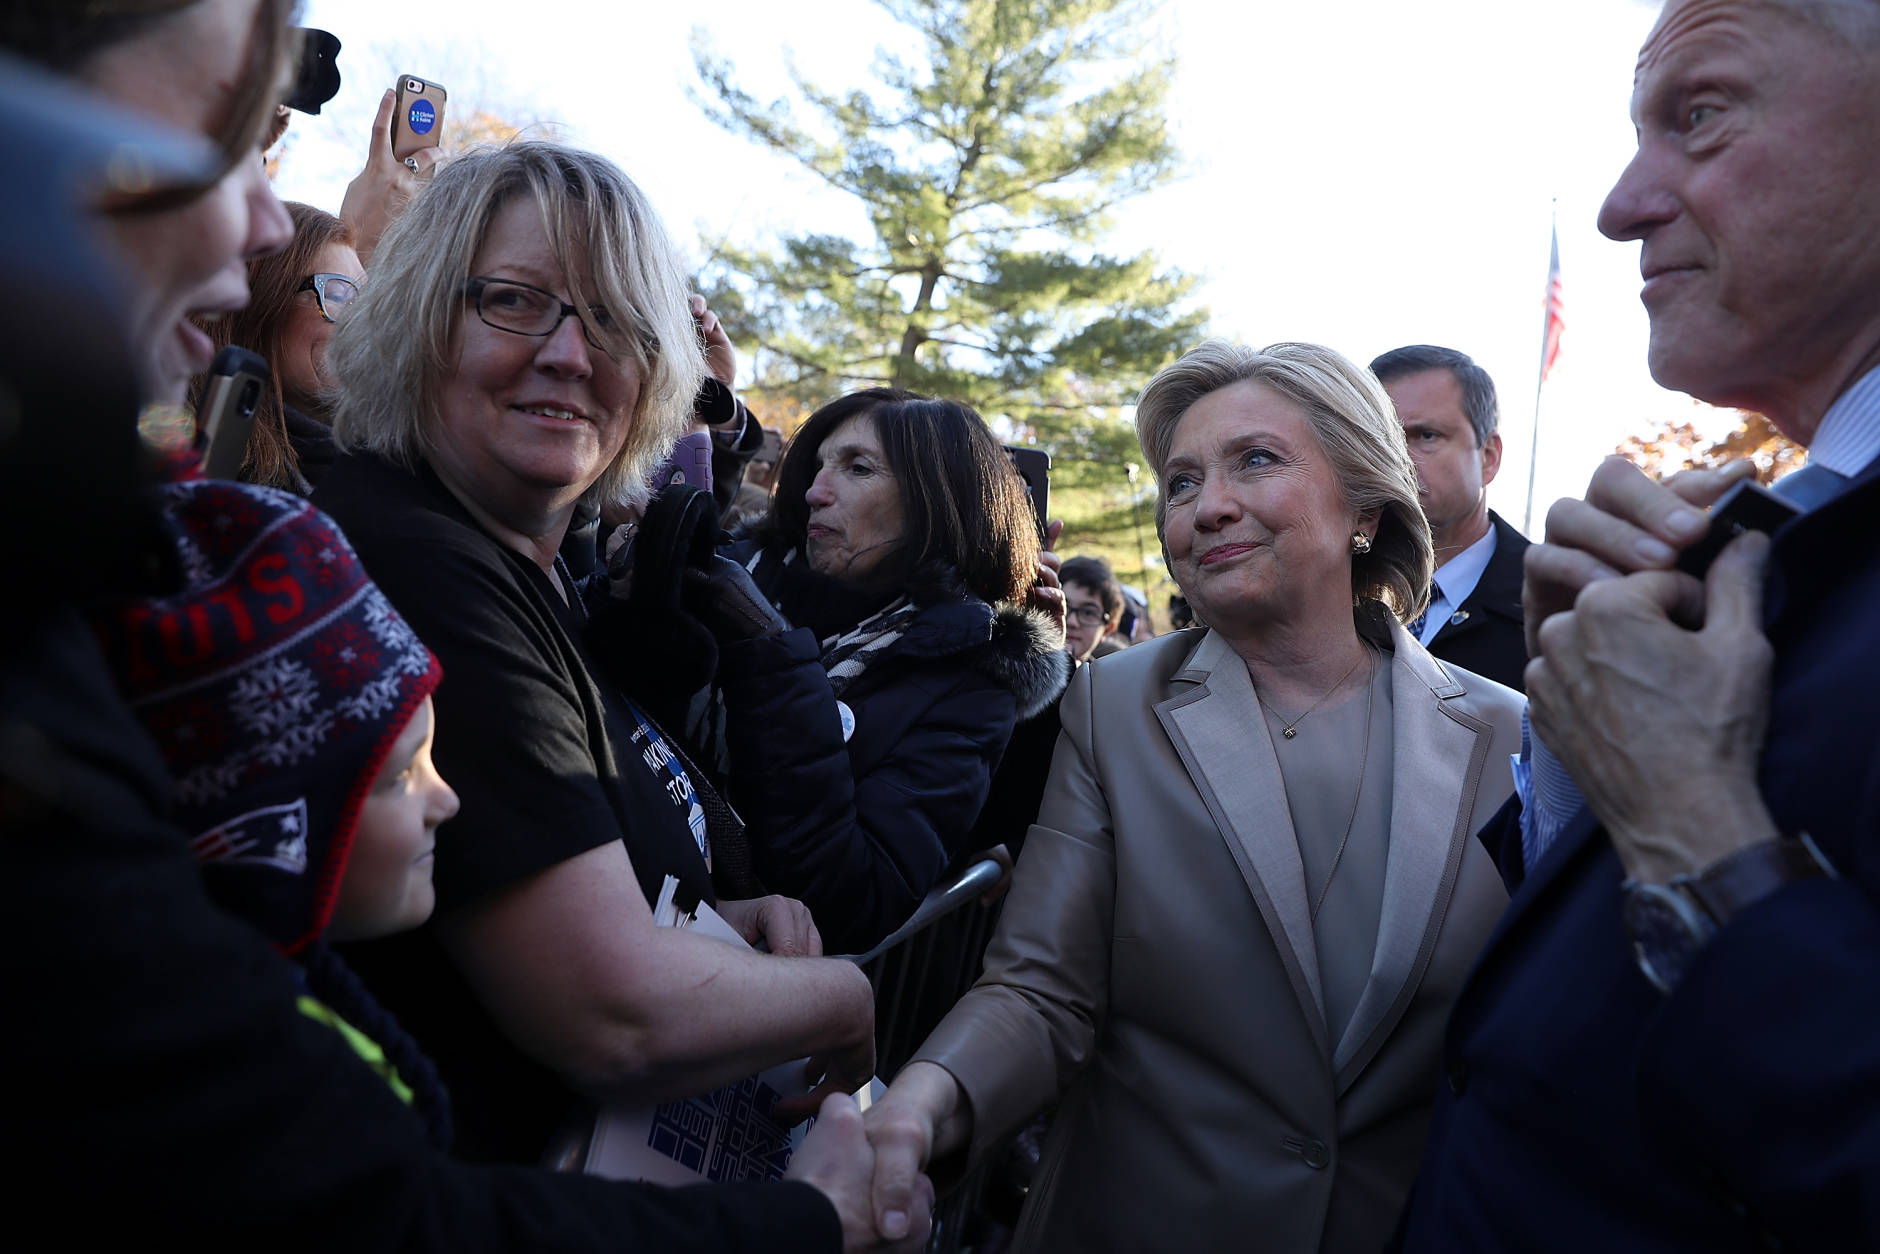 CHAPPAQUA, NY - NOVEMBER 08:  Democratic presidential nominee former Secretary of State Hillary Clinton greets supporters after voting at Douglas Grafflin Elementary School on November 8, 2016 in Chappaqua, New York. Hillary Clinton cast her ballot in the presidential election as the rest of America goes to the polls to decide between her and Republican presidential candidate Donald Trump.  (Photo by Justin Sullivan/Getty Images)